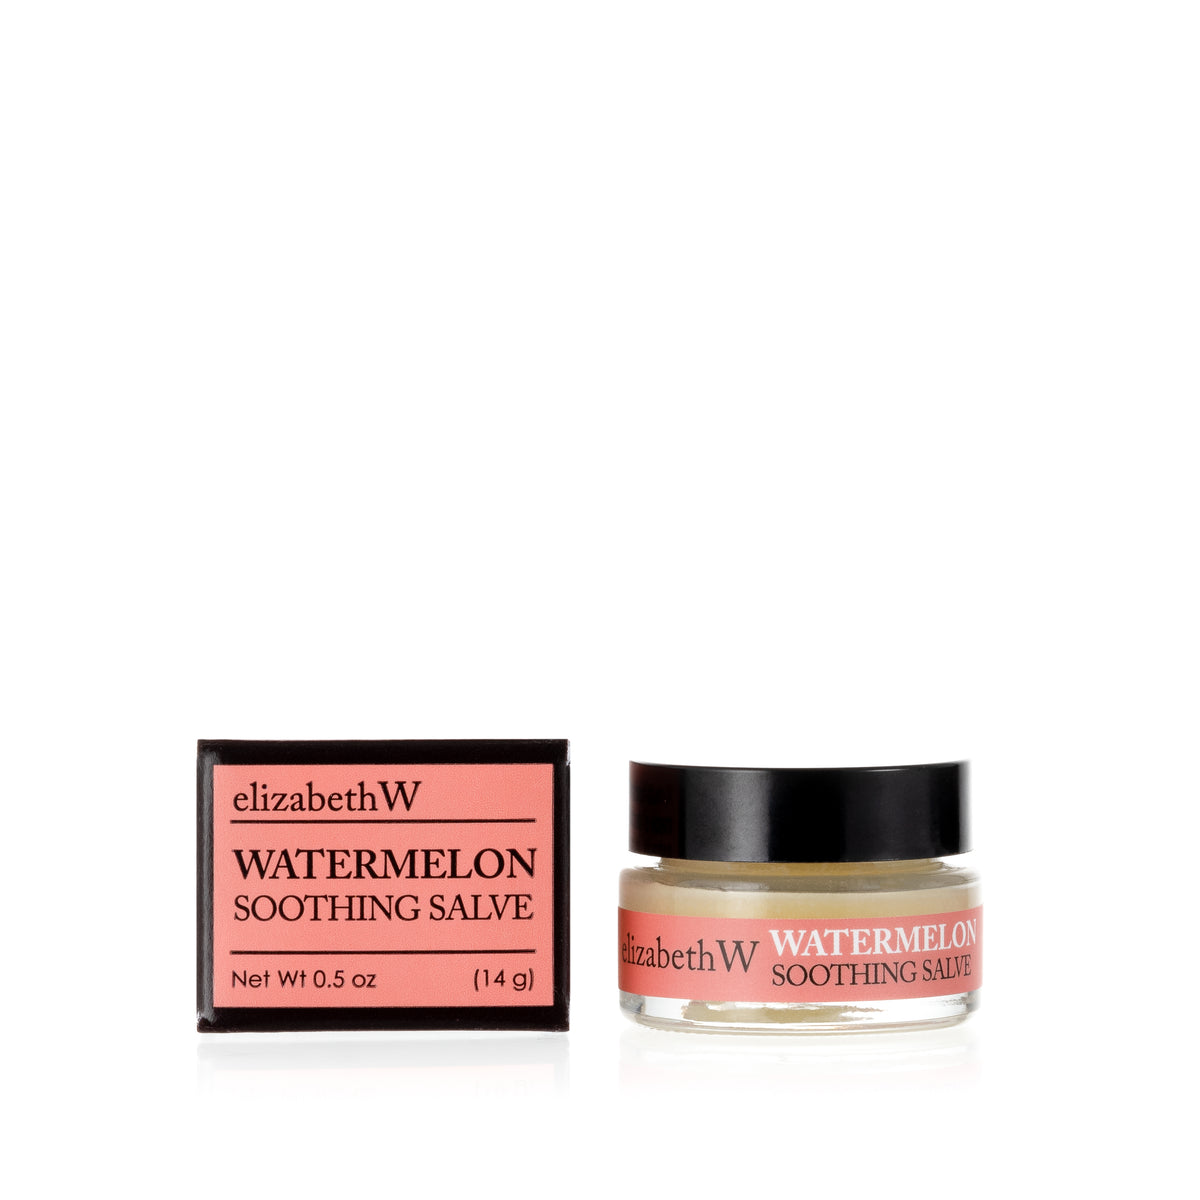 Watermelon Soothing Salve